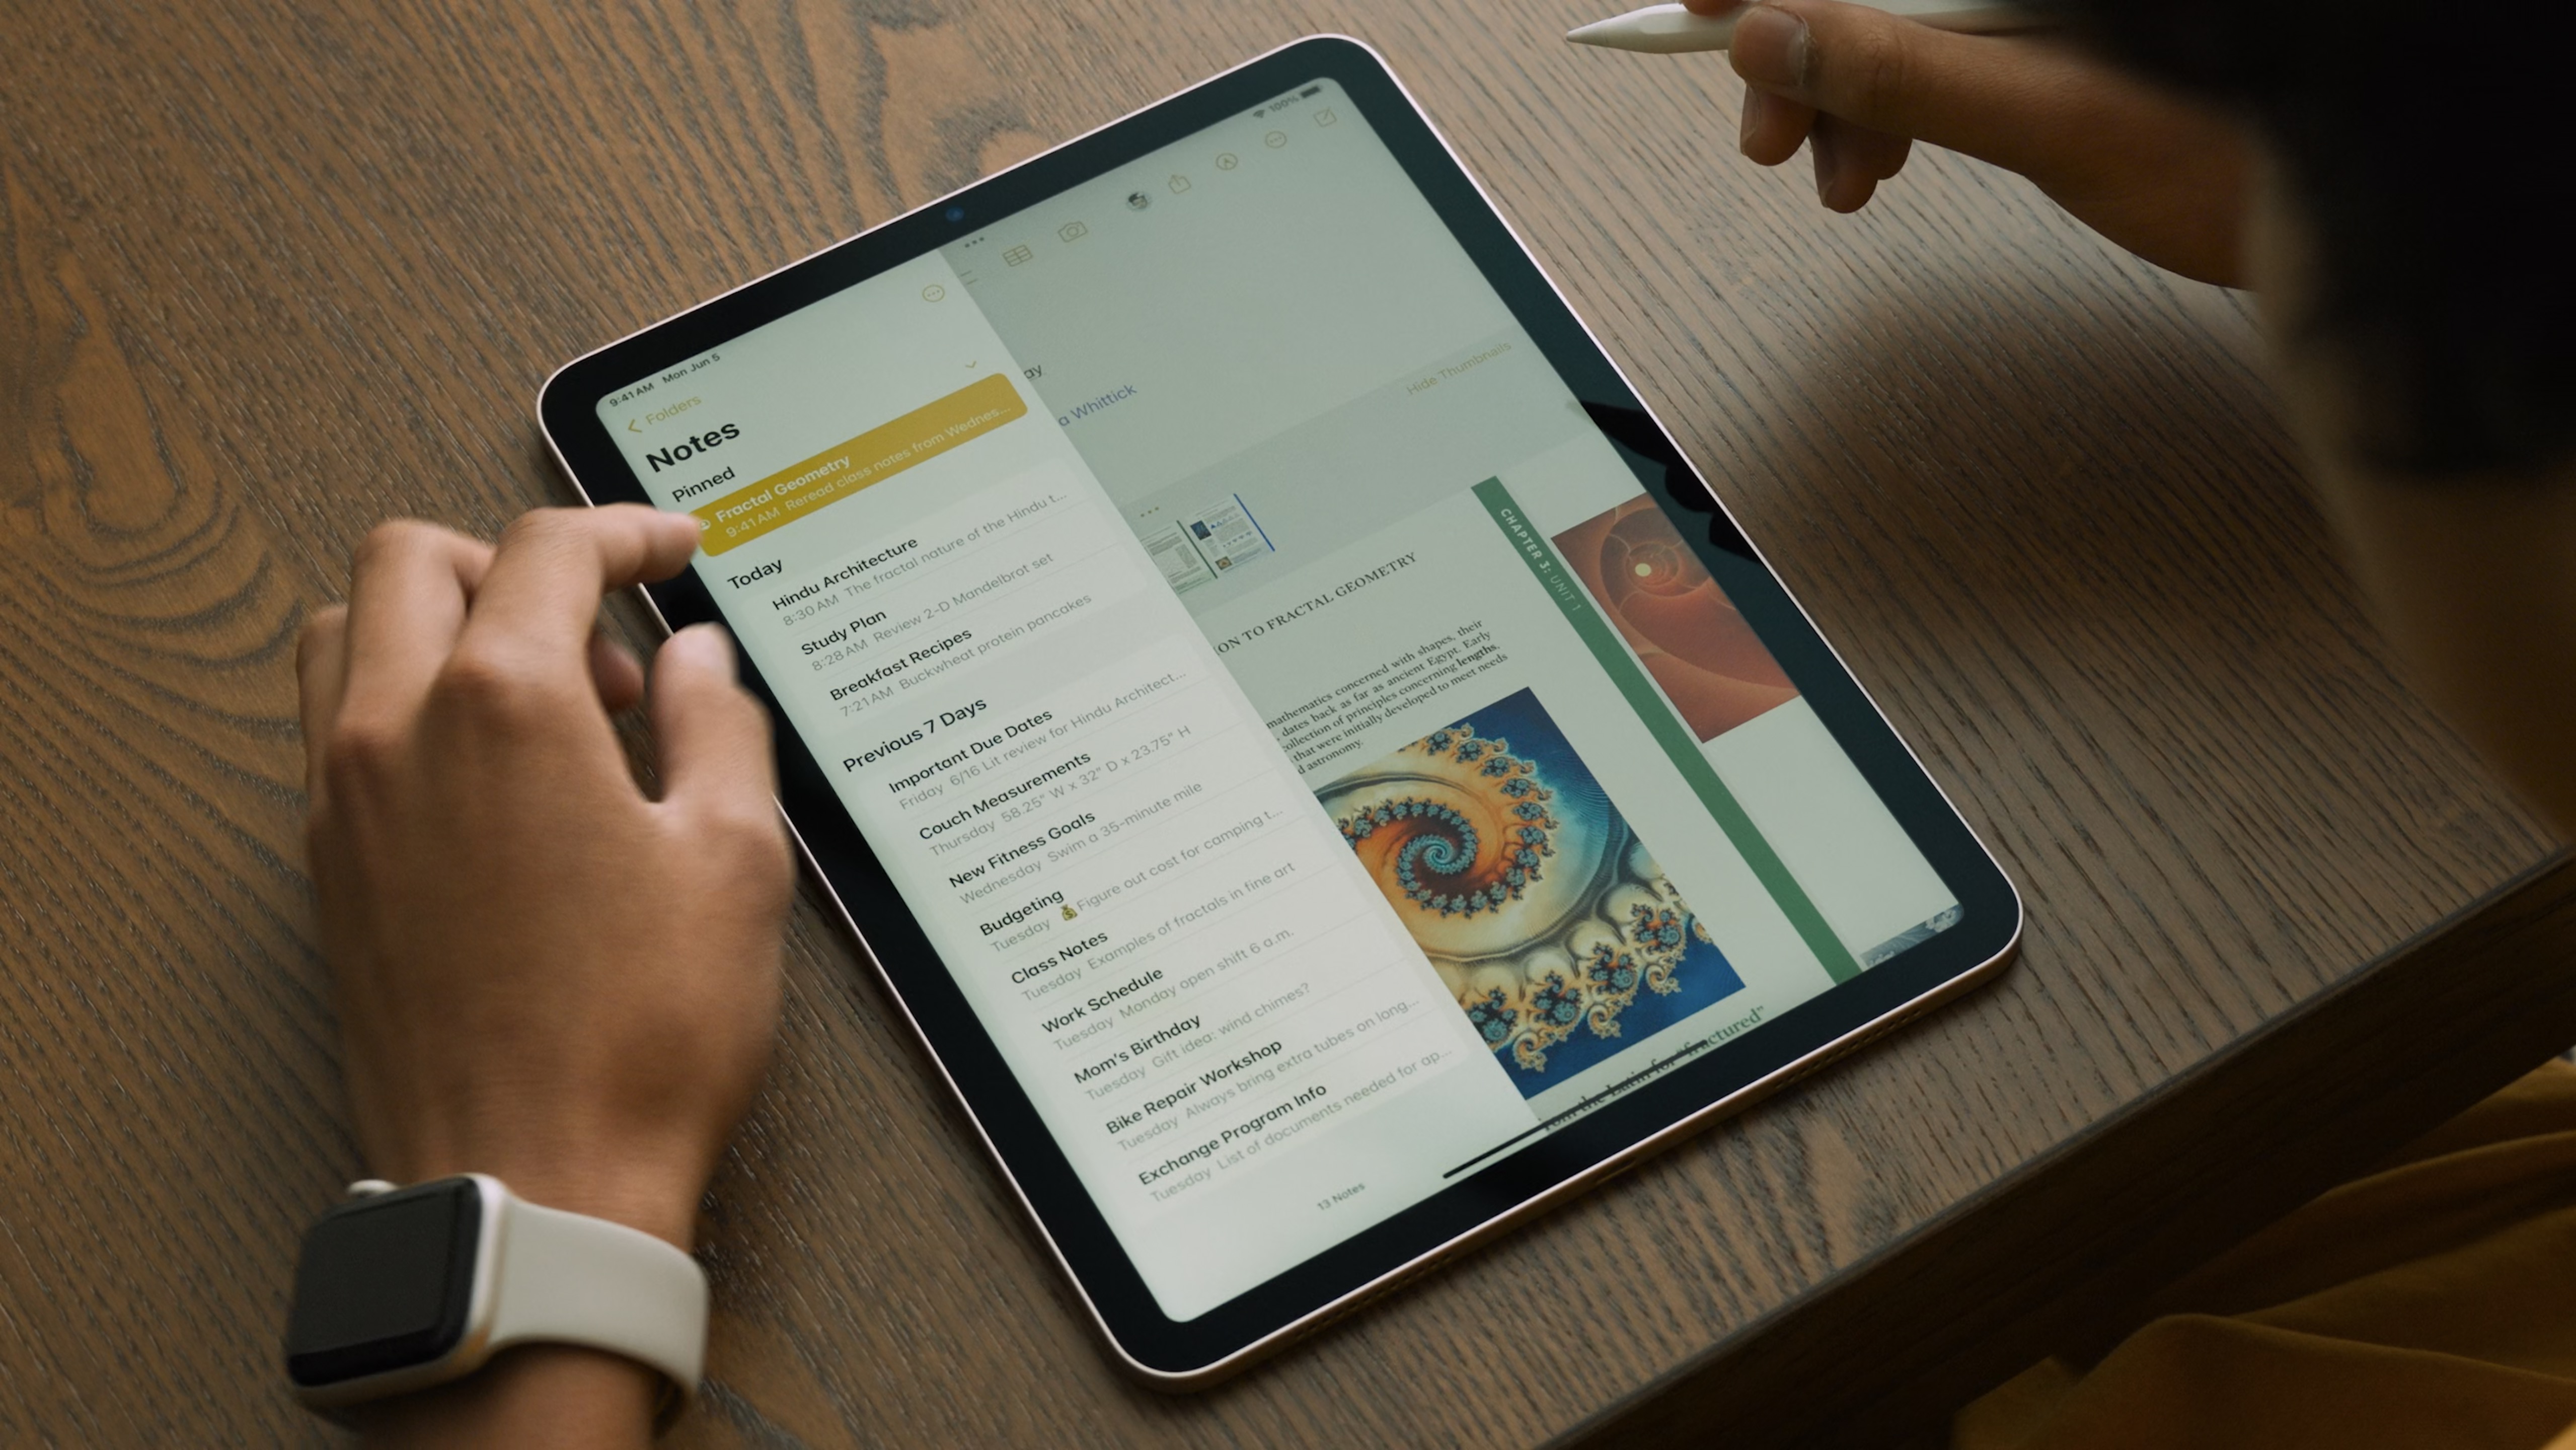 iPadOS 17's PDF app on an iPad placed on a wooden surface.